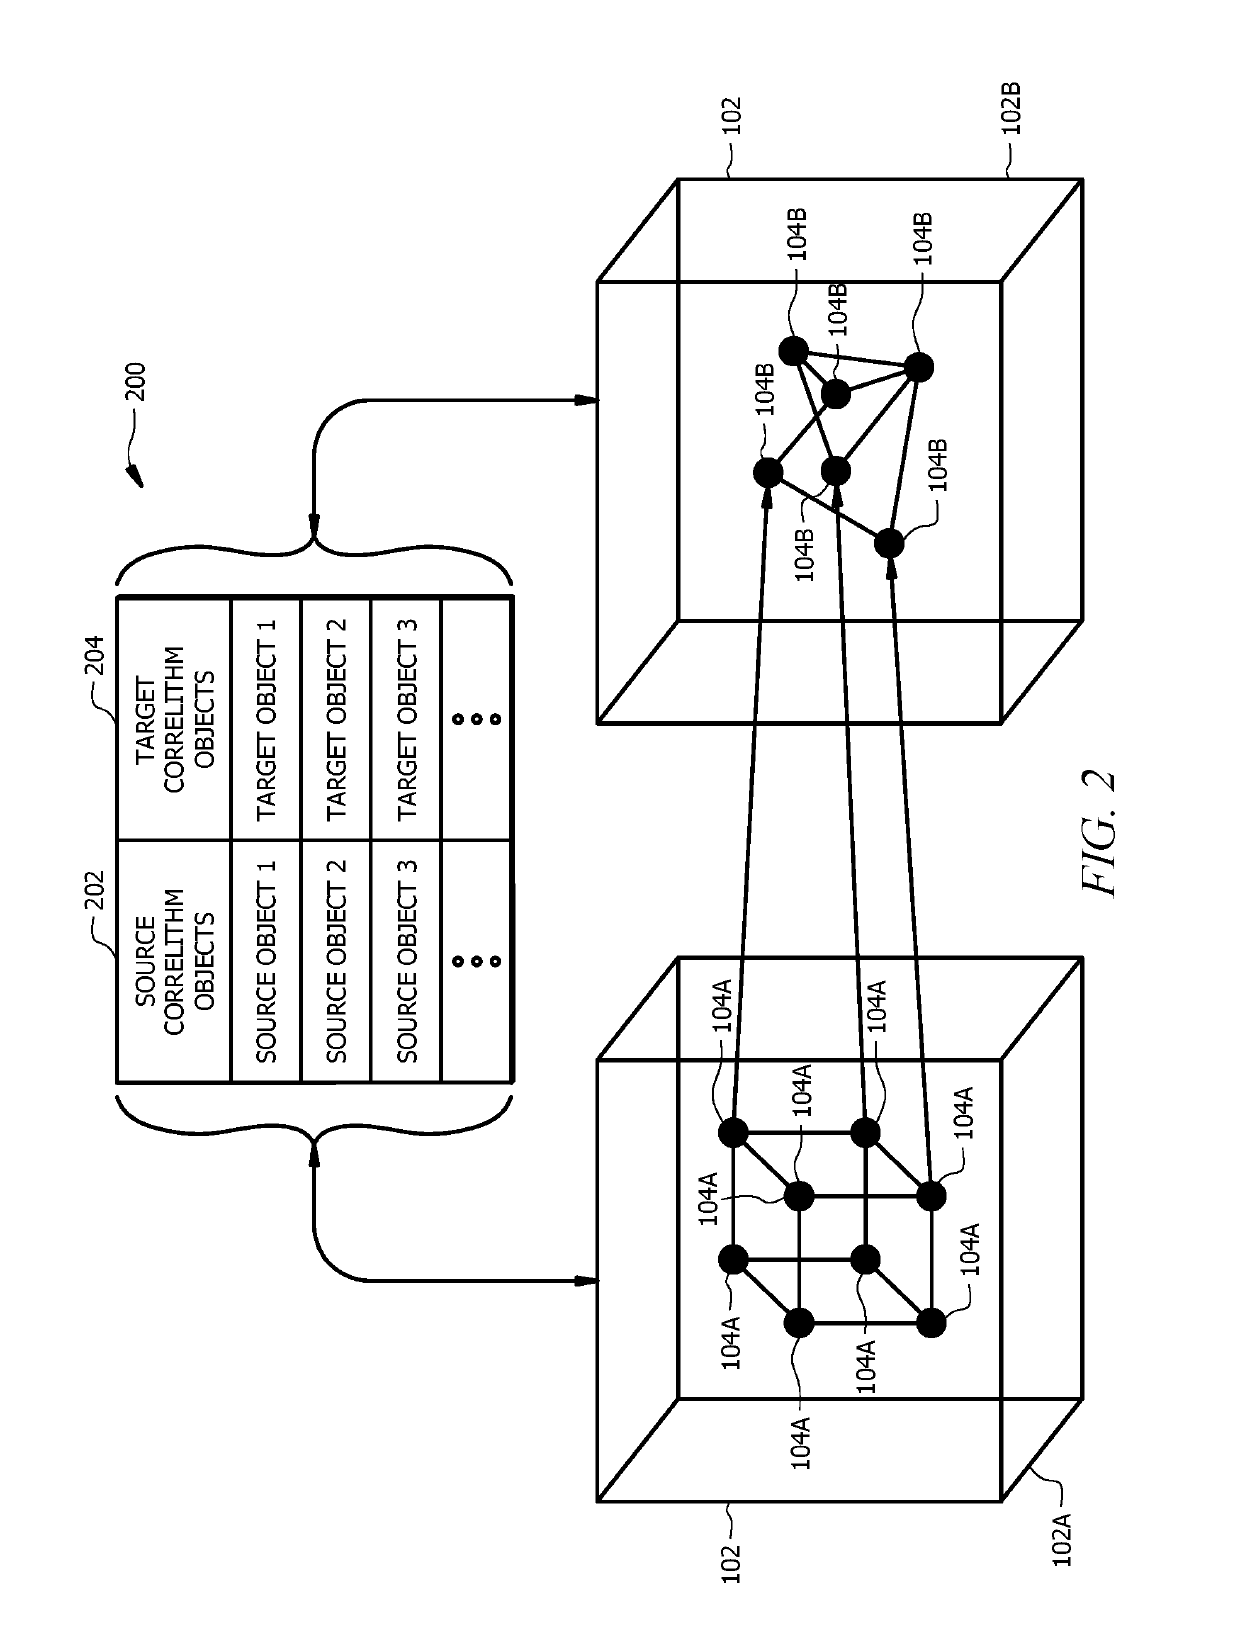 Computer architecture for emulating a correlithm object processing system that uses portions of correlithm objects and portions of a mapping table in a distributed node network